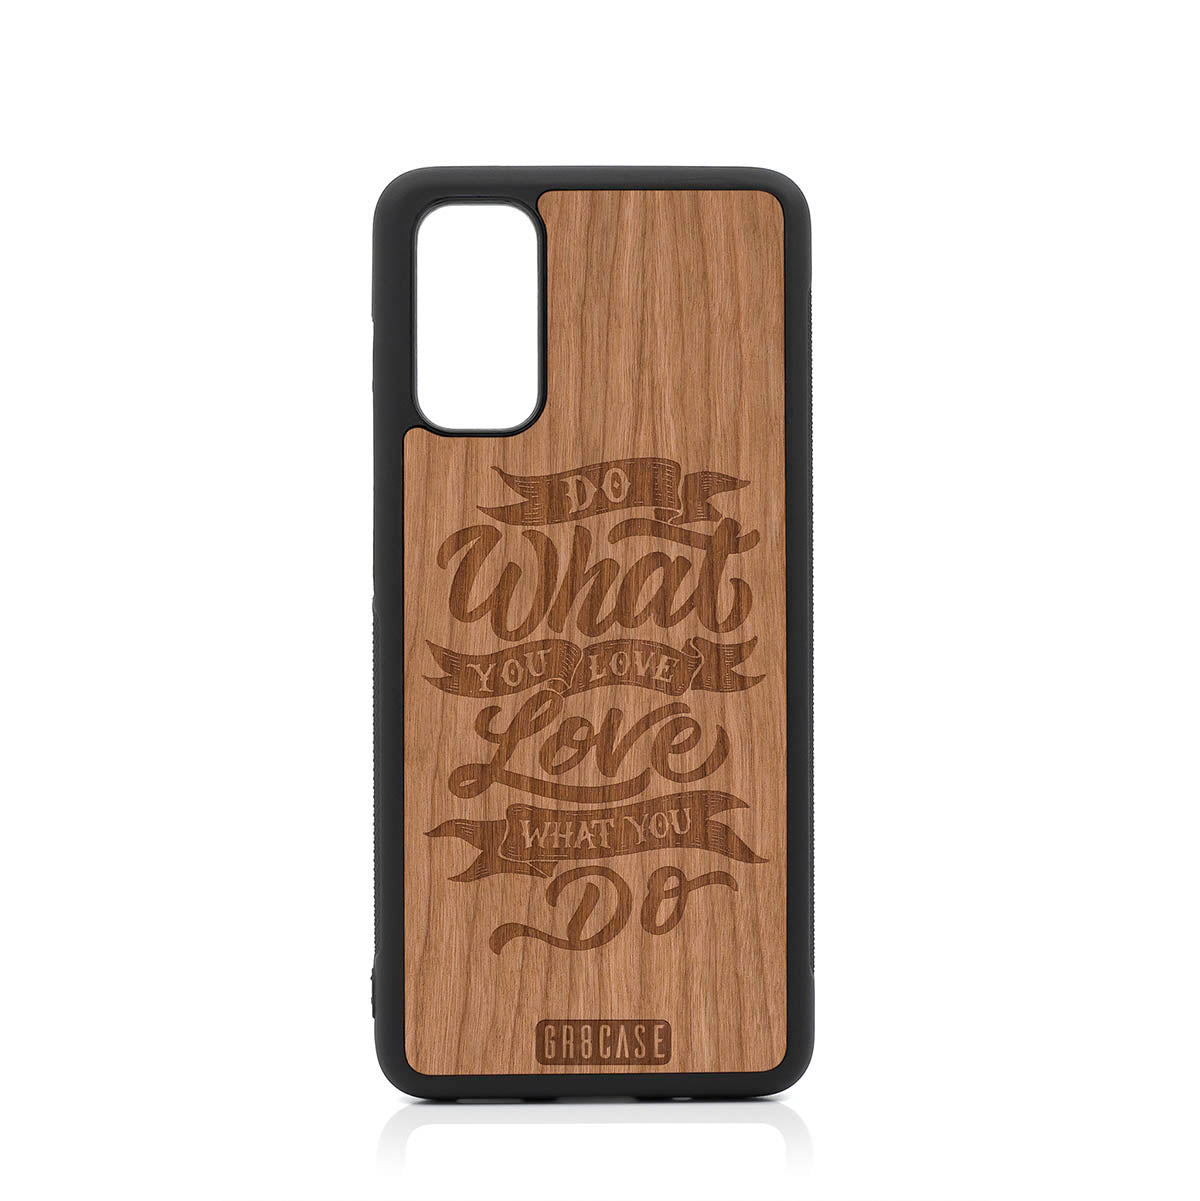 Do What You Love Love What You Do Design Wood Case For Samsung Galaxy S20 by GR8CASE